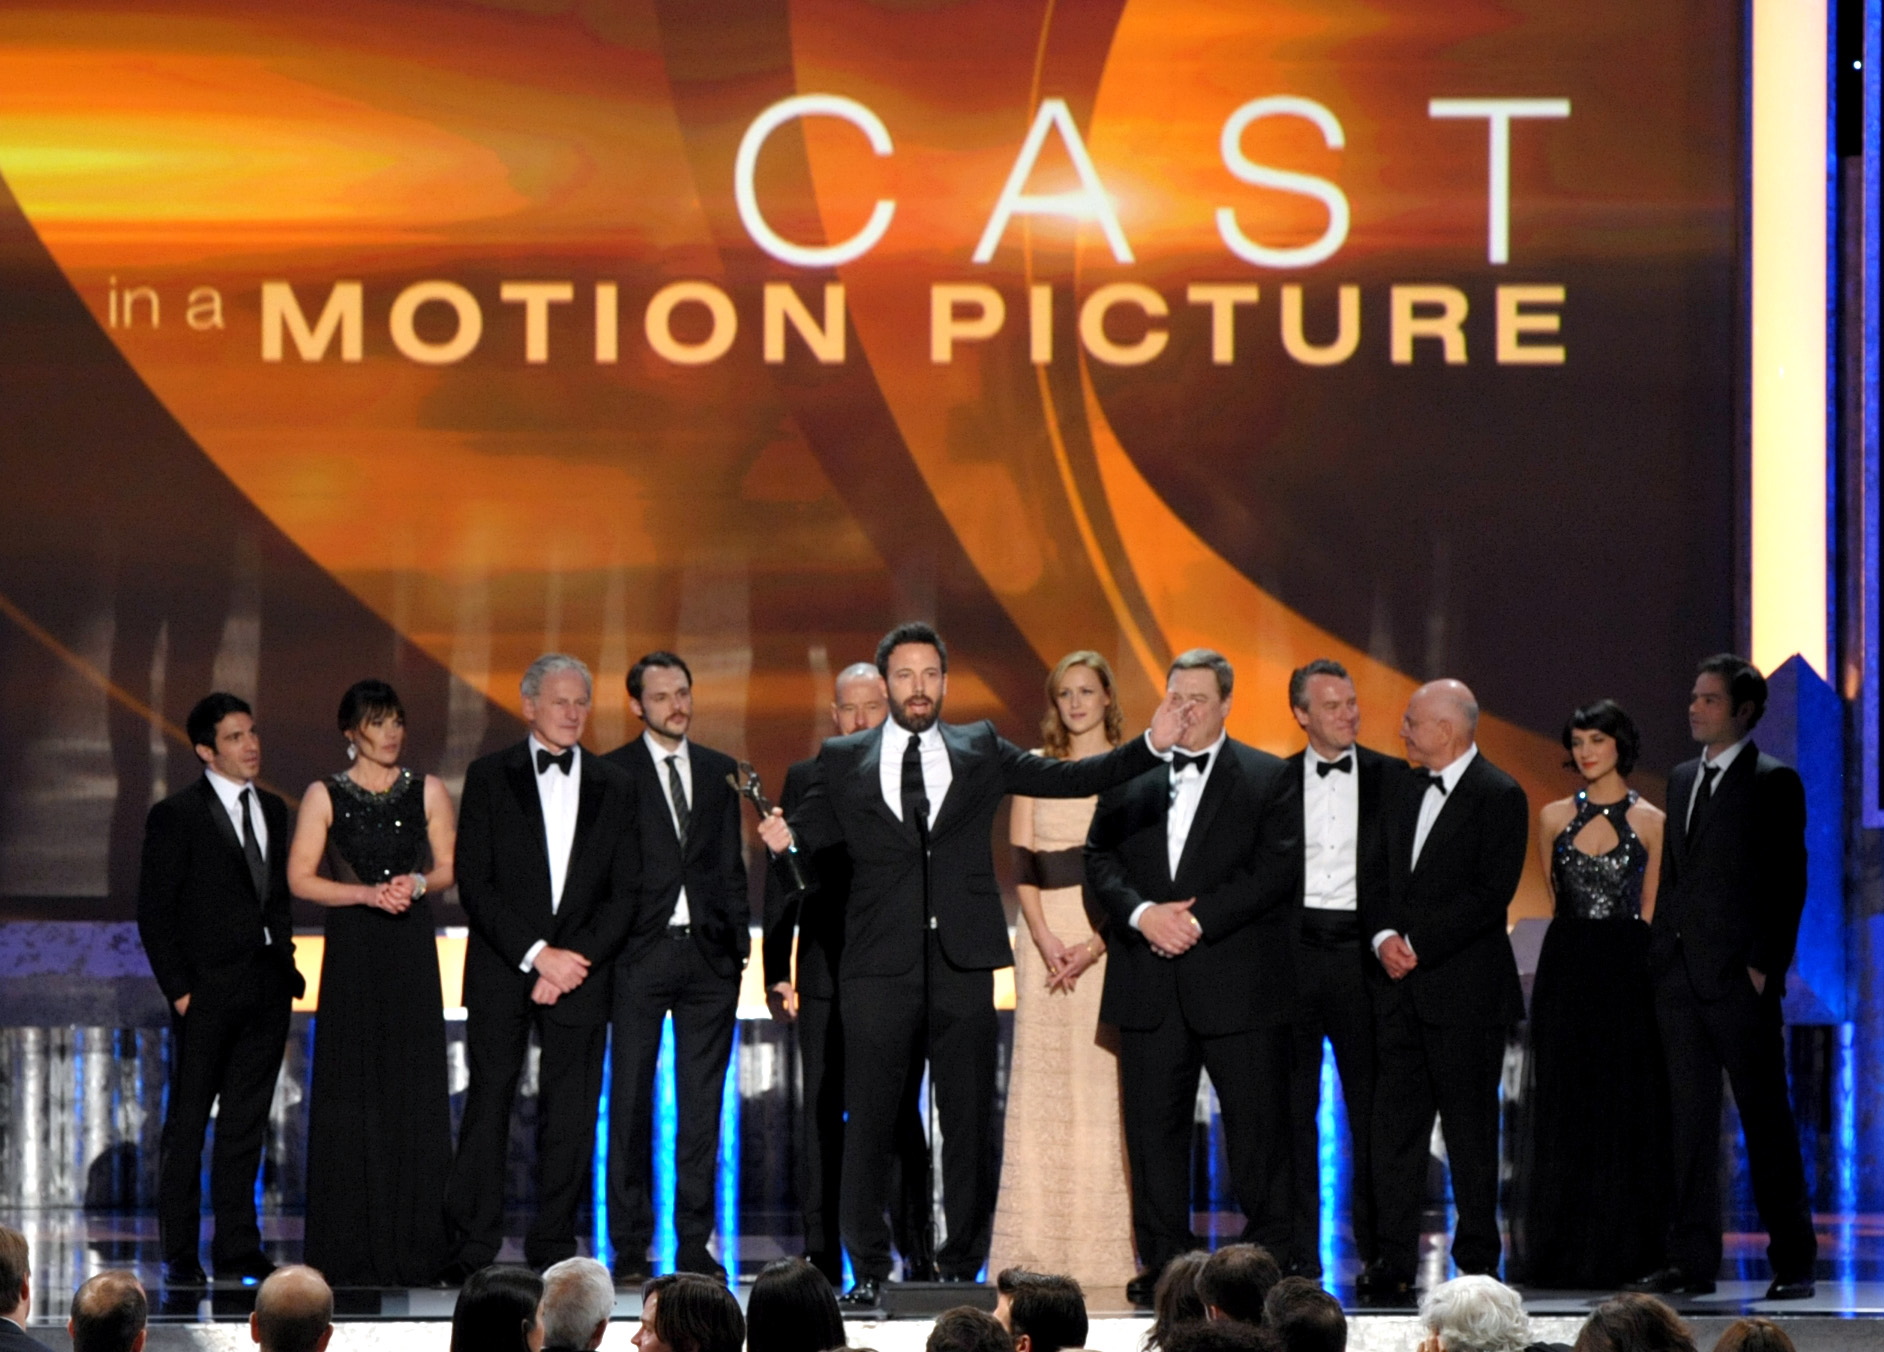 Ben Affleck, center, and the cast of argo accept the award for outstanding cast in a motion picture for &quot;Argo&quot; at the 19th Annual Screen Actors Guild Awards at the Shrine Auditorium in Los Angeles on Sunday.